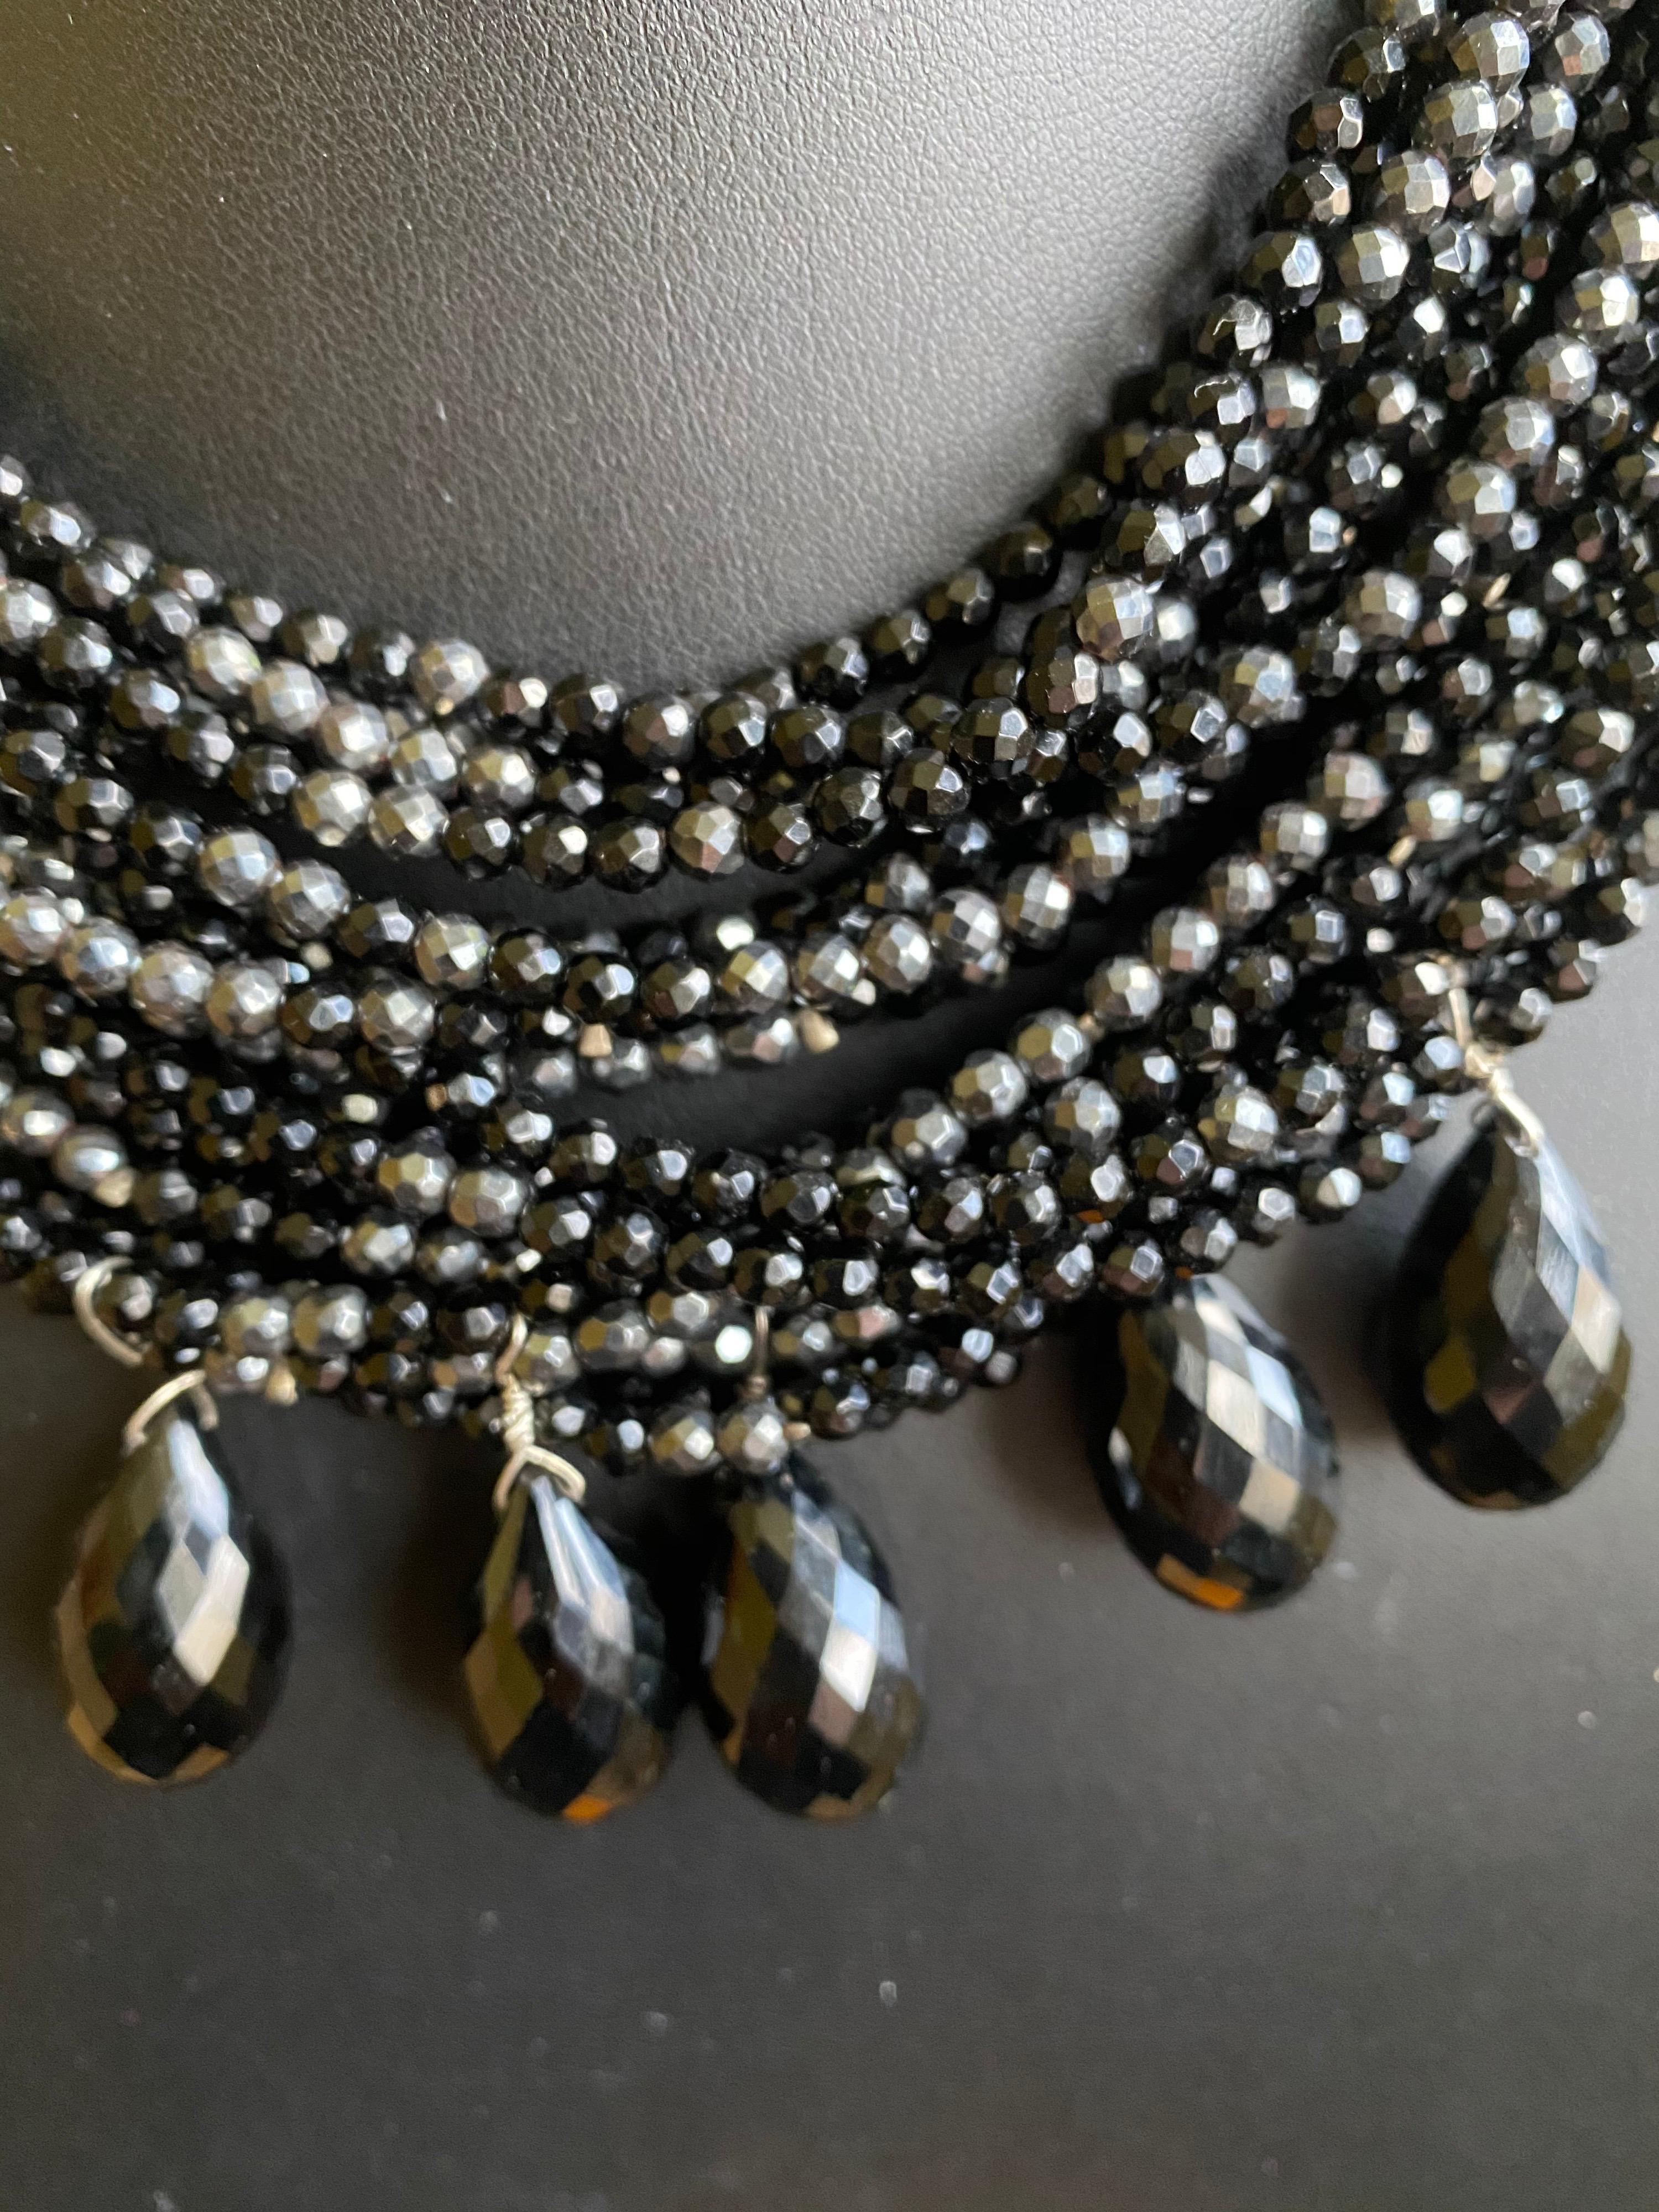 This is from the Jane Magon Collections Business Woman Collection with 22 twisted strands of gemstone beads, Hematite and Black Onyx Beads with Five Faceted Black Onyx Large Briolettes make the perfect accessory to any outfit. Fits as a chocker but